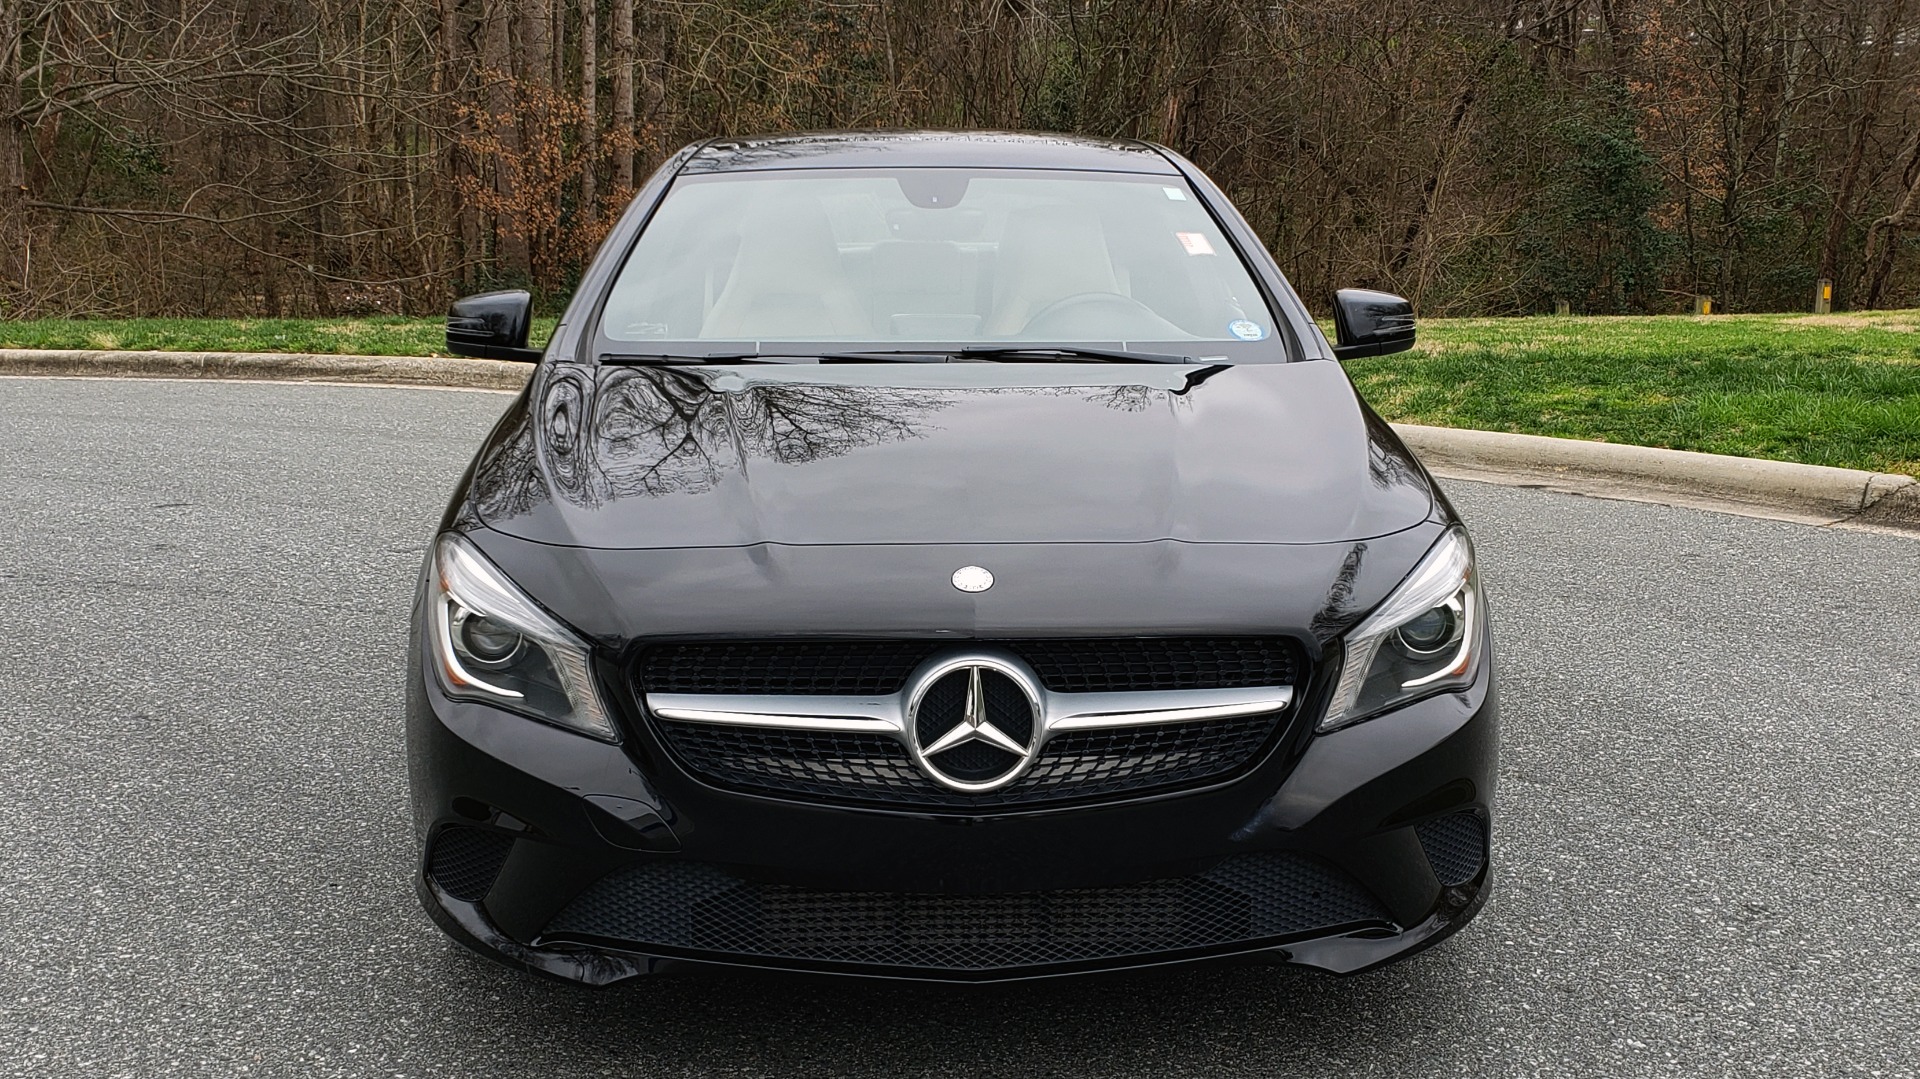 Used 2014 Mercedes-Benz CLA-Class CLA 250 PREM / MULTIMEDIA / NAV / PANO-ROOF / REARVIEW for sale Sold at Formula Imports in Charlotte NC 28227 18